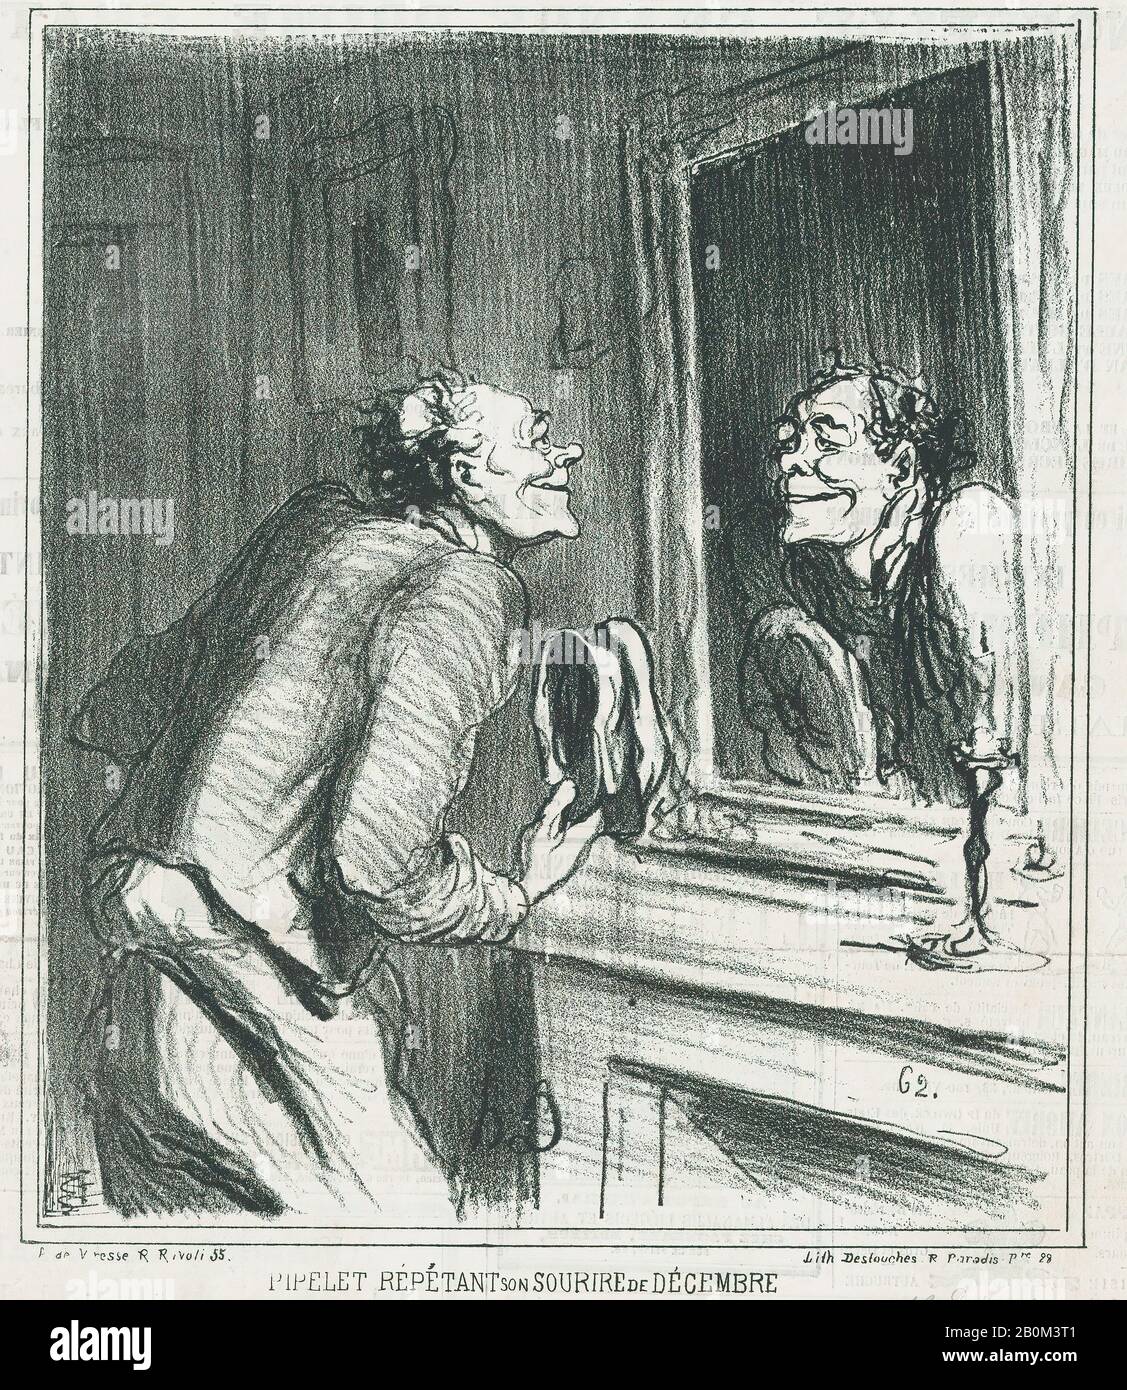 Honoré Daumier, The concierge rehearsing his December smile: Take care! take care! For New Year's Day is approaching!, from 'News of the day,' published in Le Charivari, December 13, 1866, 'News of the day' (Actualités), Honoré Daumier (French, Marseilles 1808–1879 Valmondois), December 13, 1866, Lithograph on newsprint; second state of two (Delteil), Image: 9 1/4 × 7 15/16 in. (23.5 × 20.1 cm), Sheet: 11 7/8 × 9 15/16 in. (30.2 × 25.2 cm), Prints Stock Photo